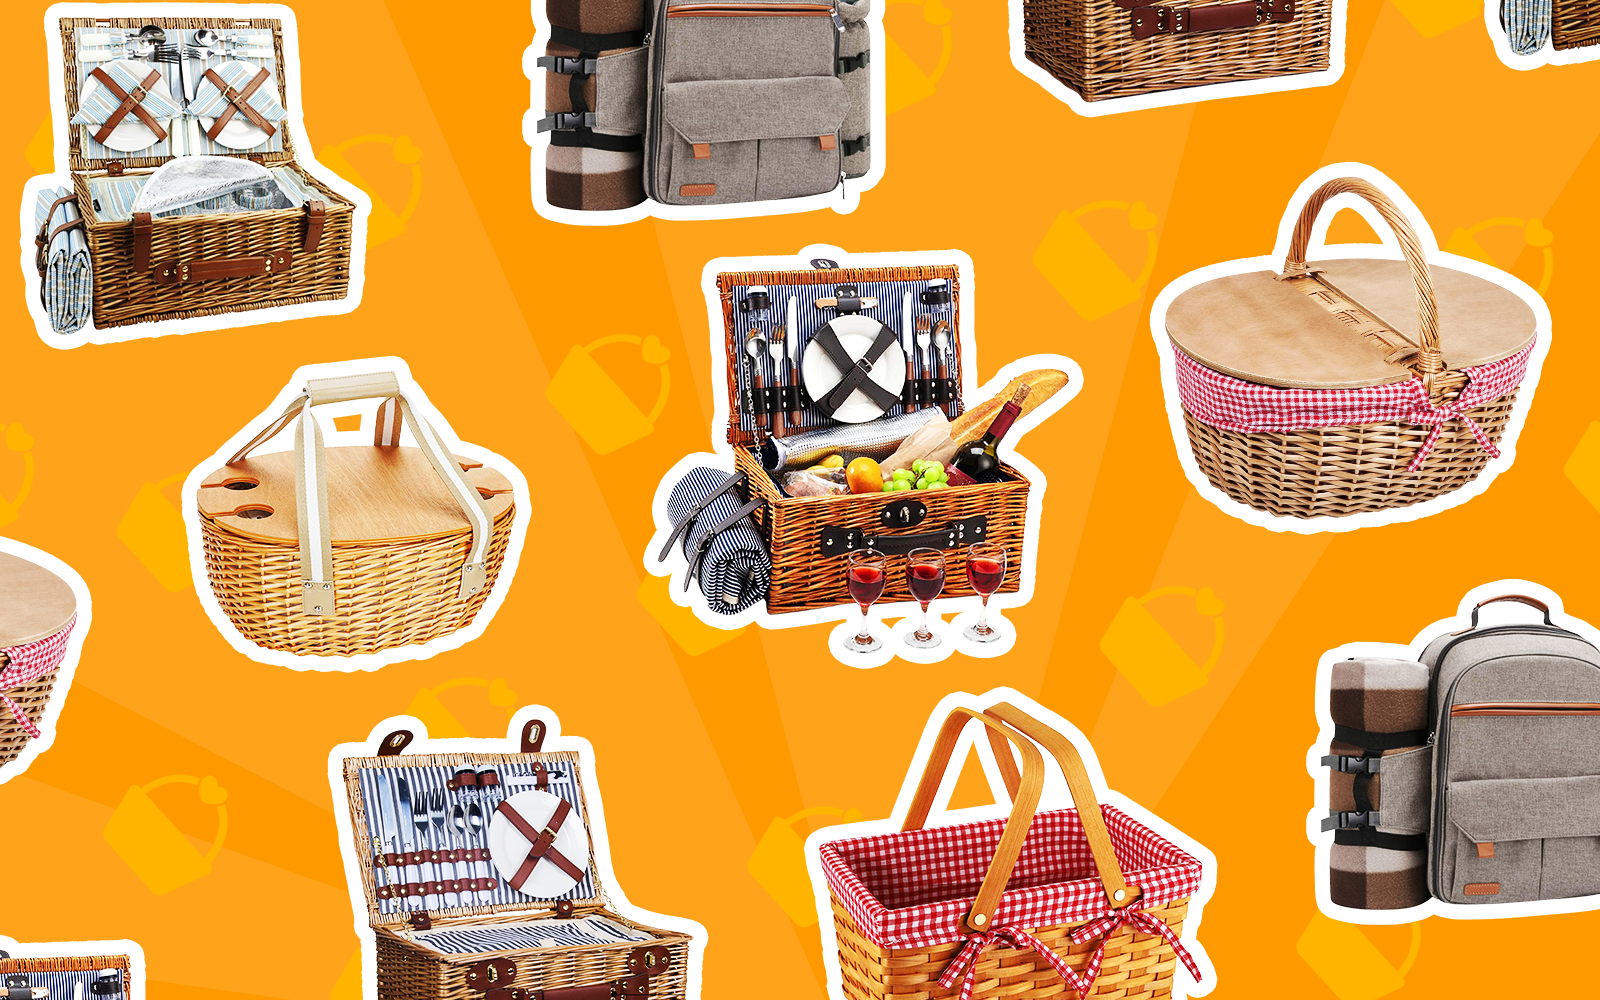 Best picnic basket featured image in a layflat graphic